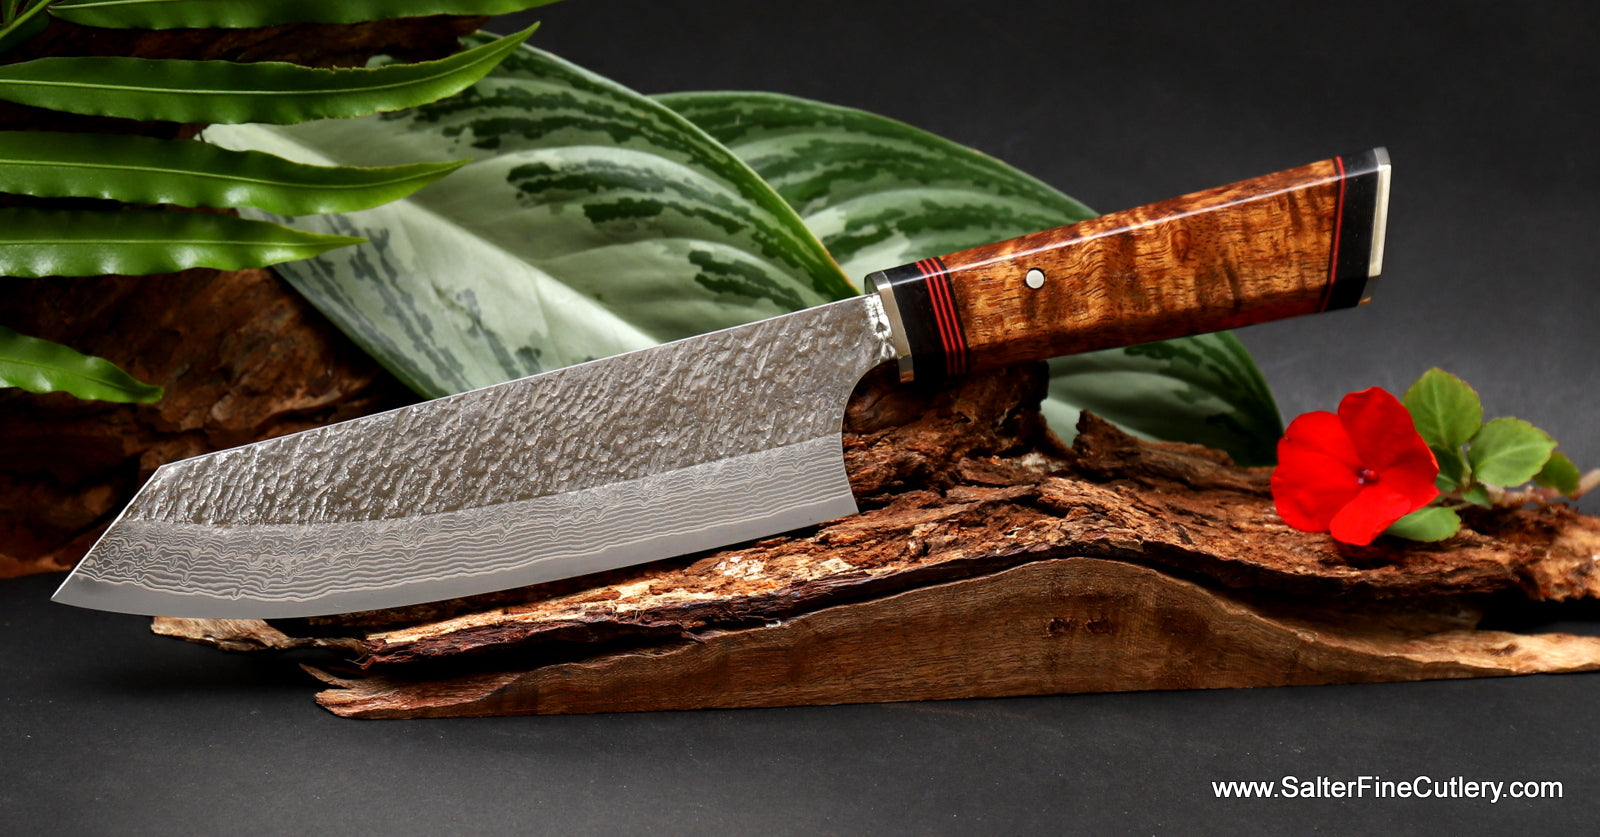 180mm bunka style chef knife hand-forged in Japan exclusively for Salter Fine Cutlery luxury kitchenware